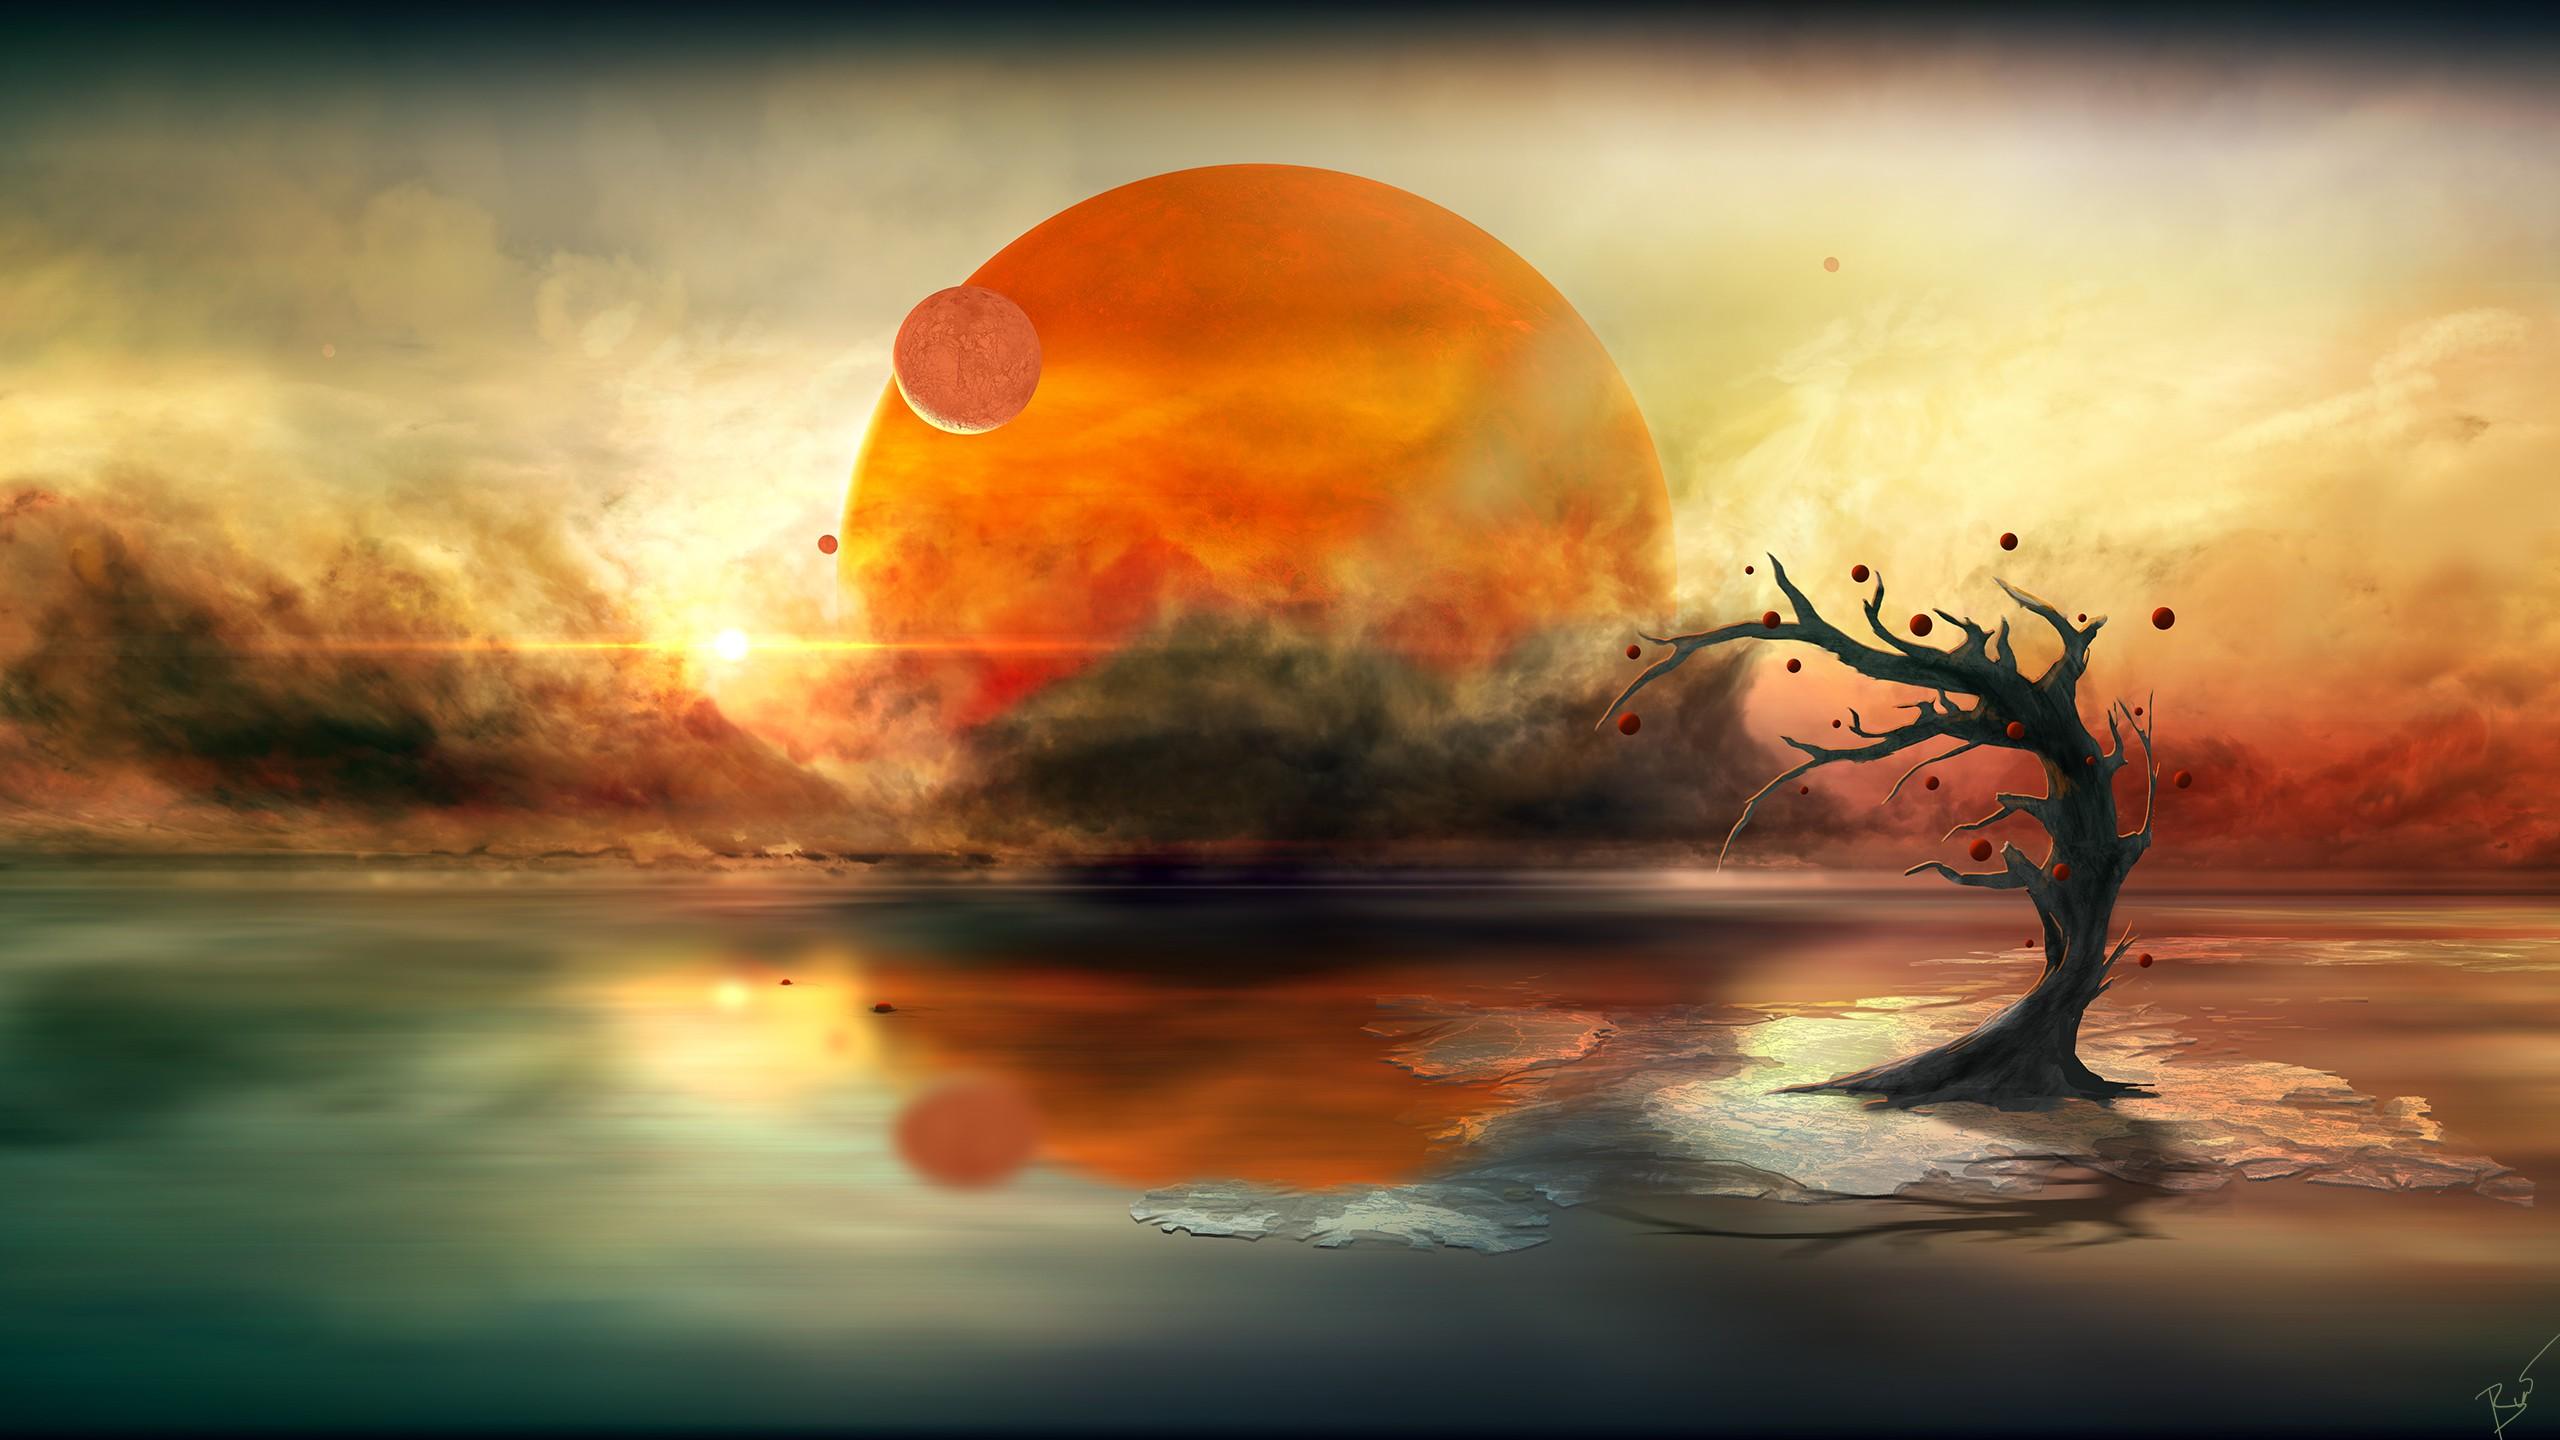 Planet Reflections Drawing Wallpaper and Free